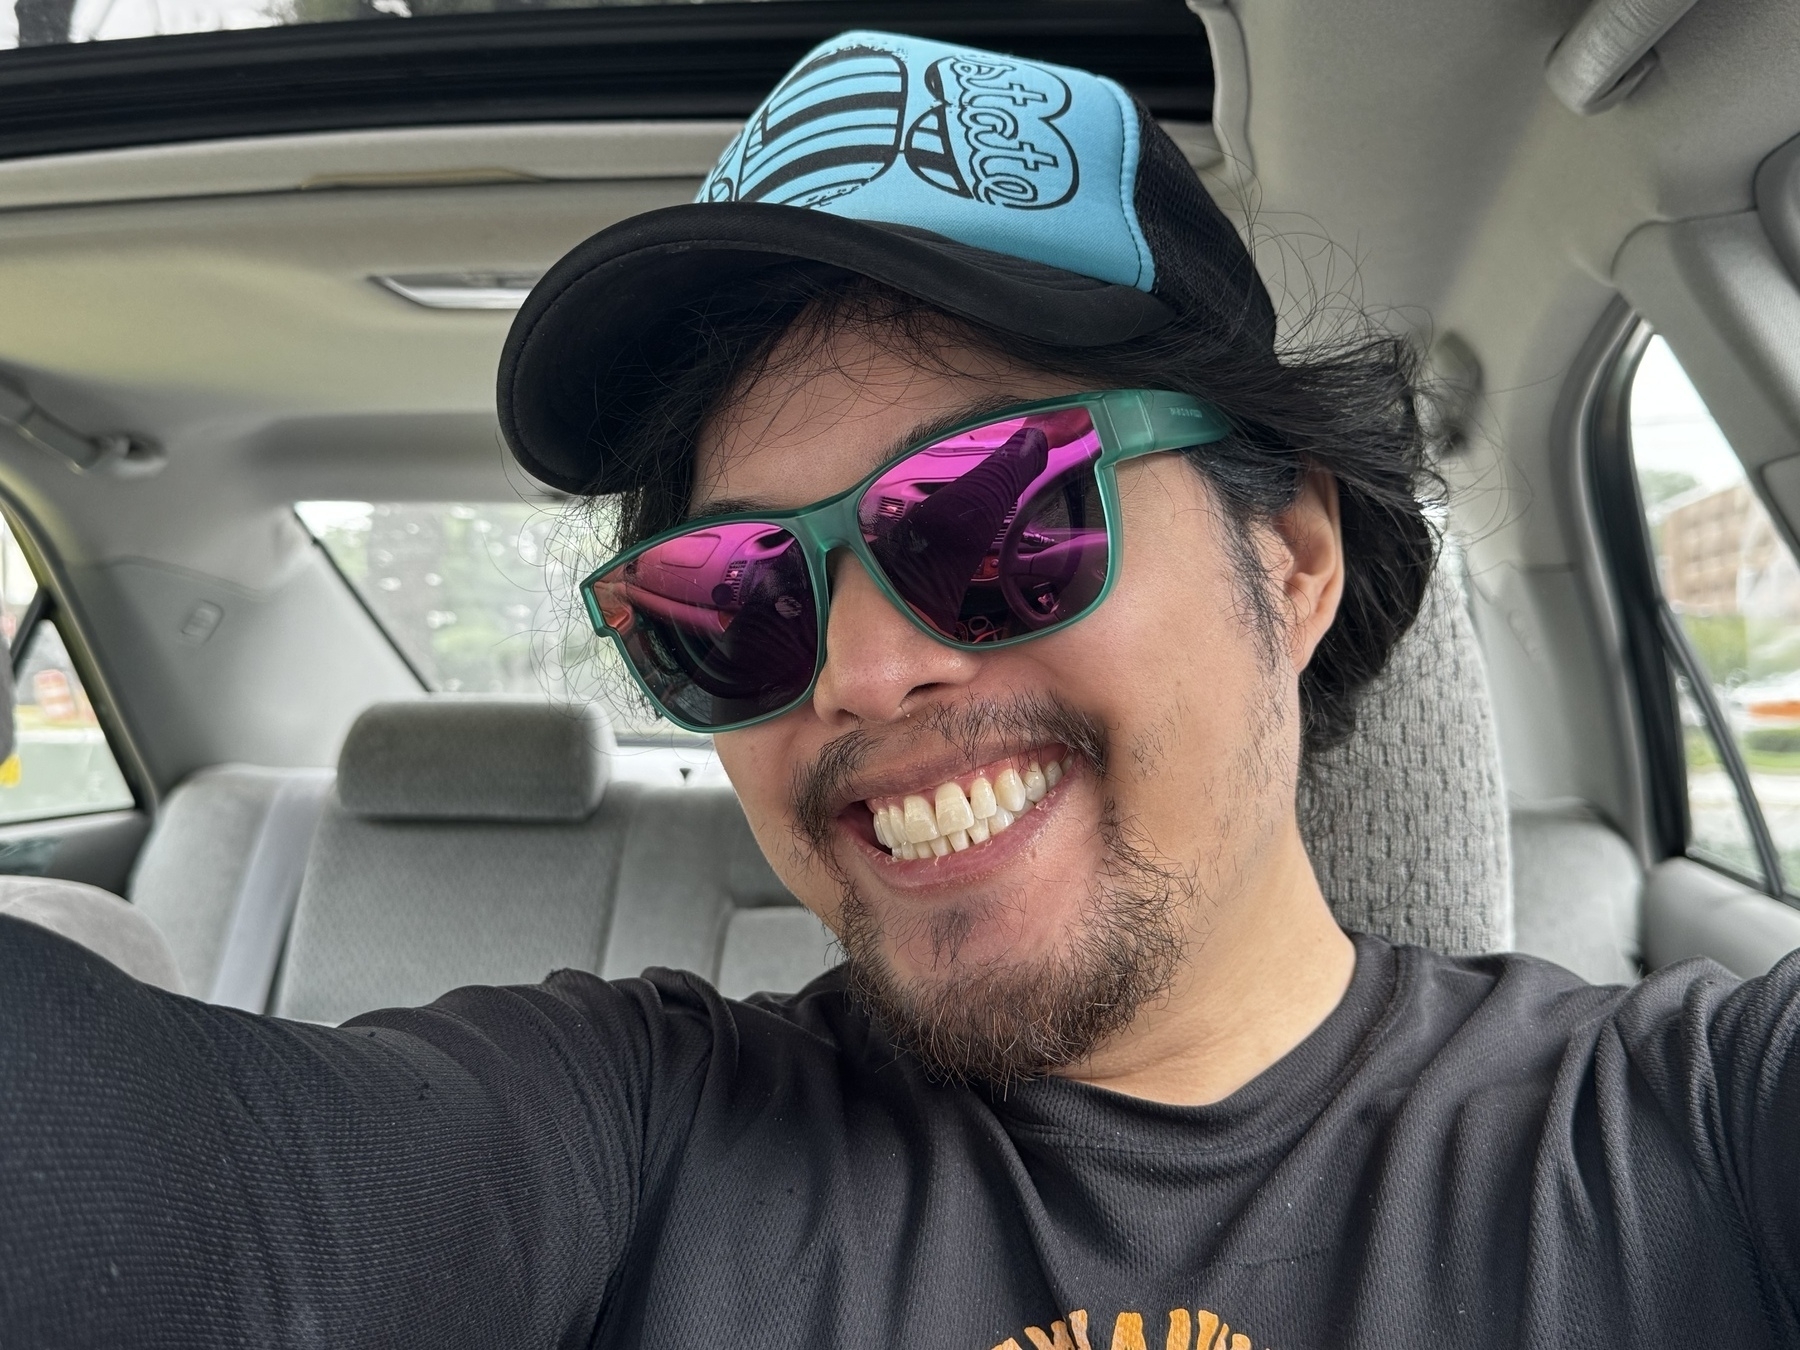 Miguel a masc Filipino man is wearing a black shirt inside a car. He is wearing purple lens sunglasses with a green frame. And a blue trucker hat. He is smiling with teeth. His hair is in a ponytail. It is day time. You set him from the chest up. 